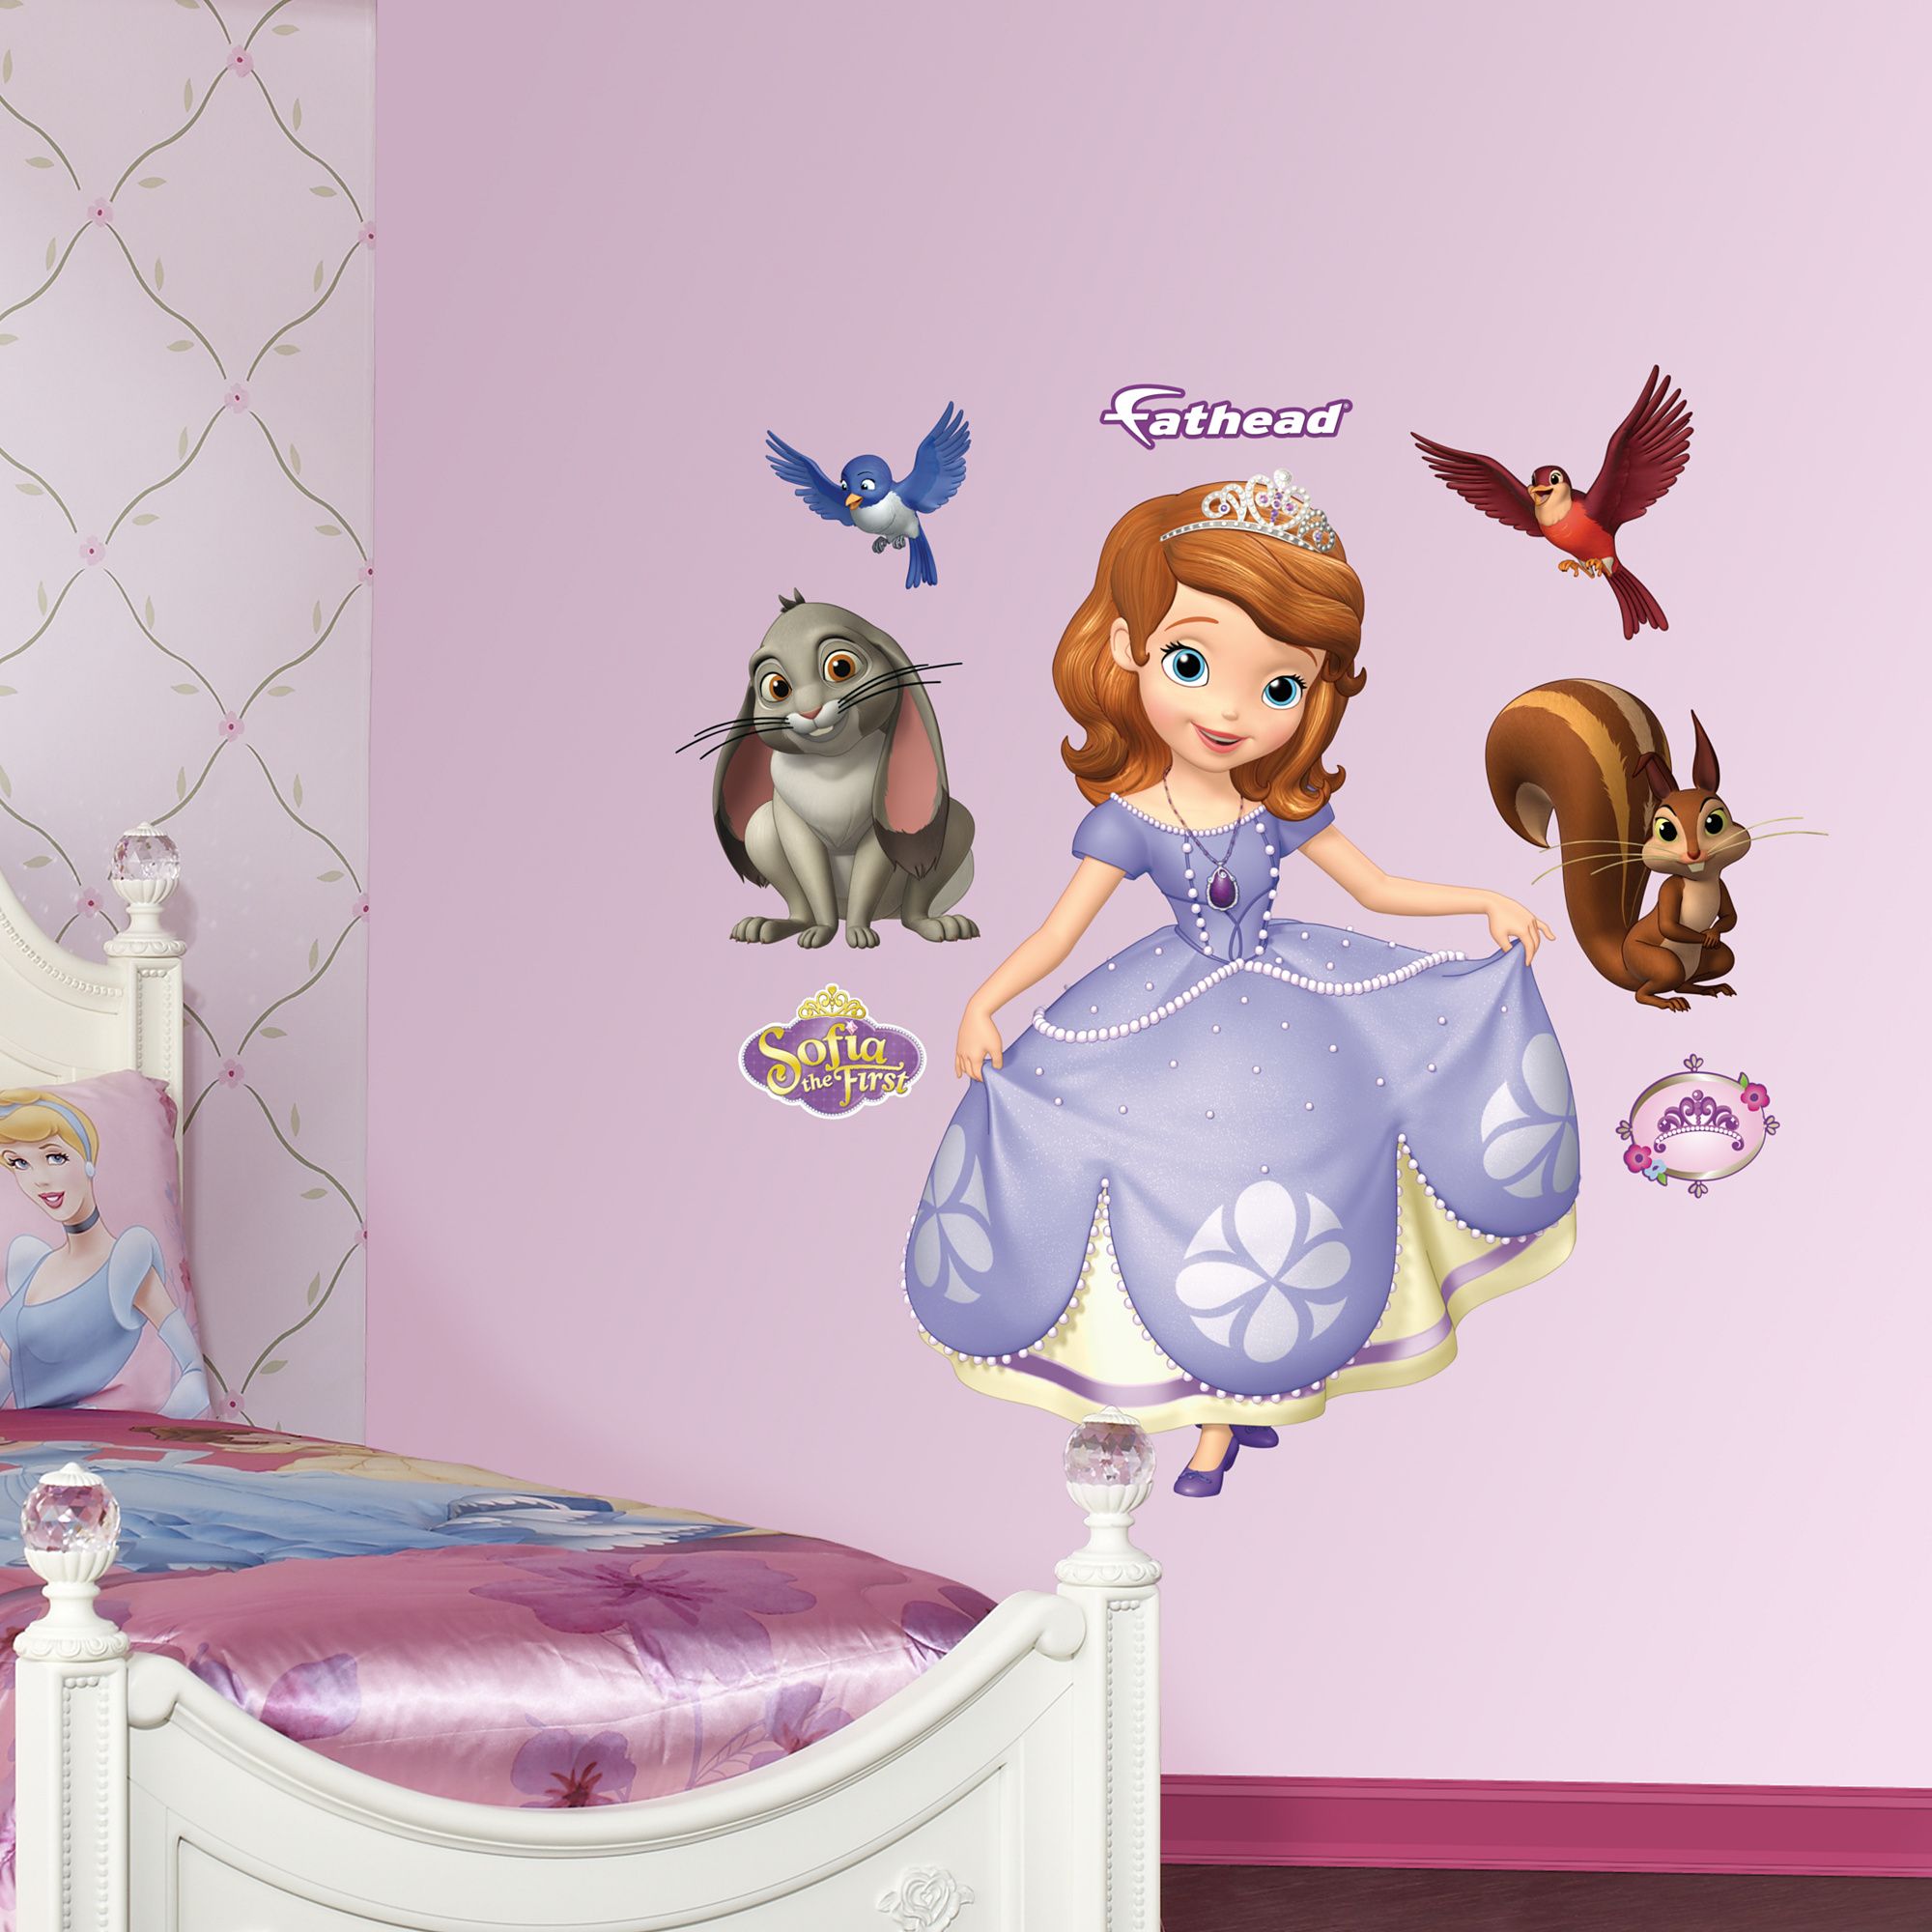 Fathead Wallpaper Of Sofia The First For Mijitas Room - Wall Decals Sofia The First , HD Wallpaper & Backgrounds